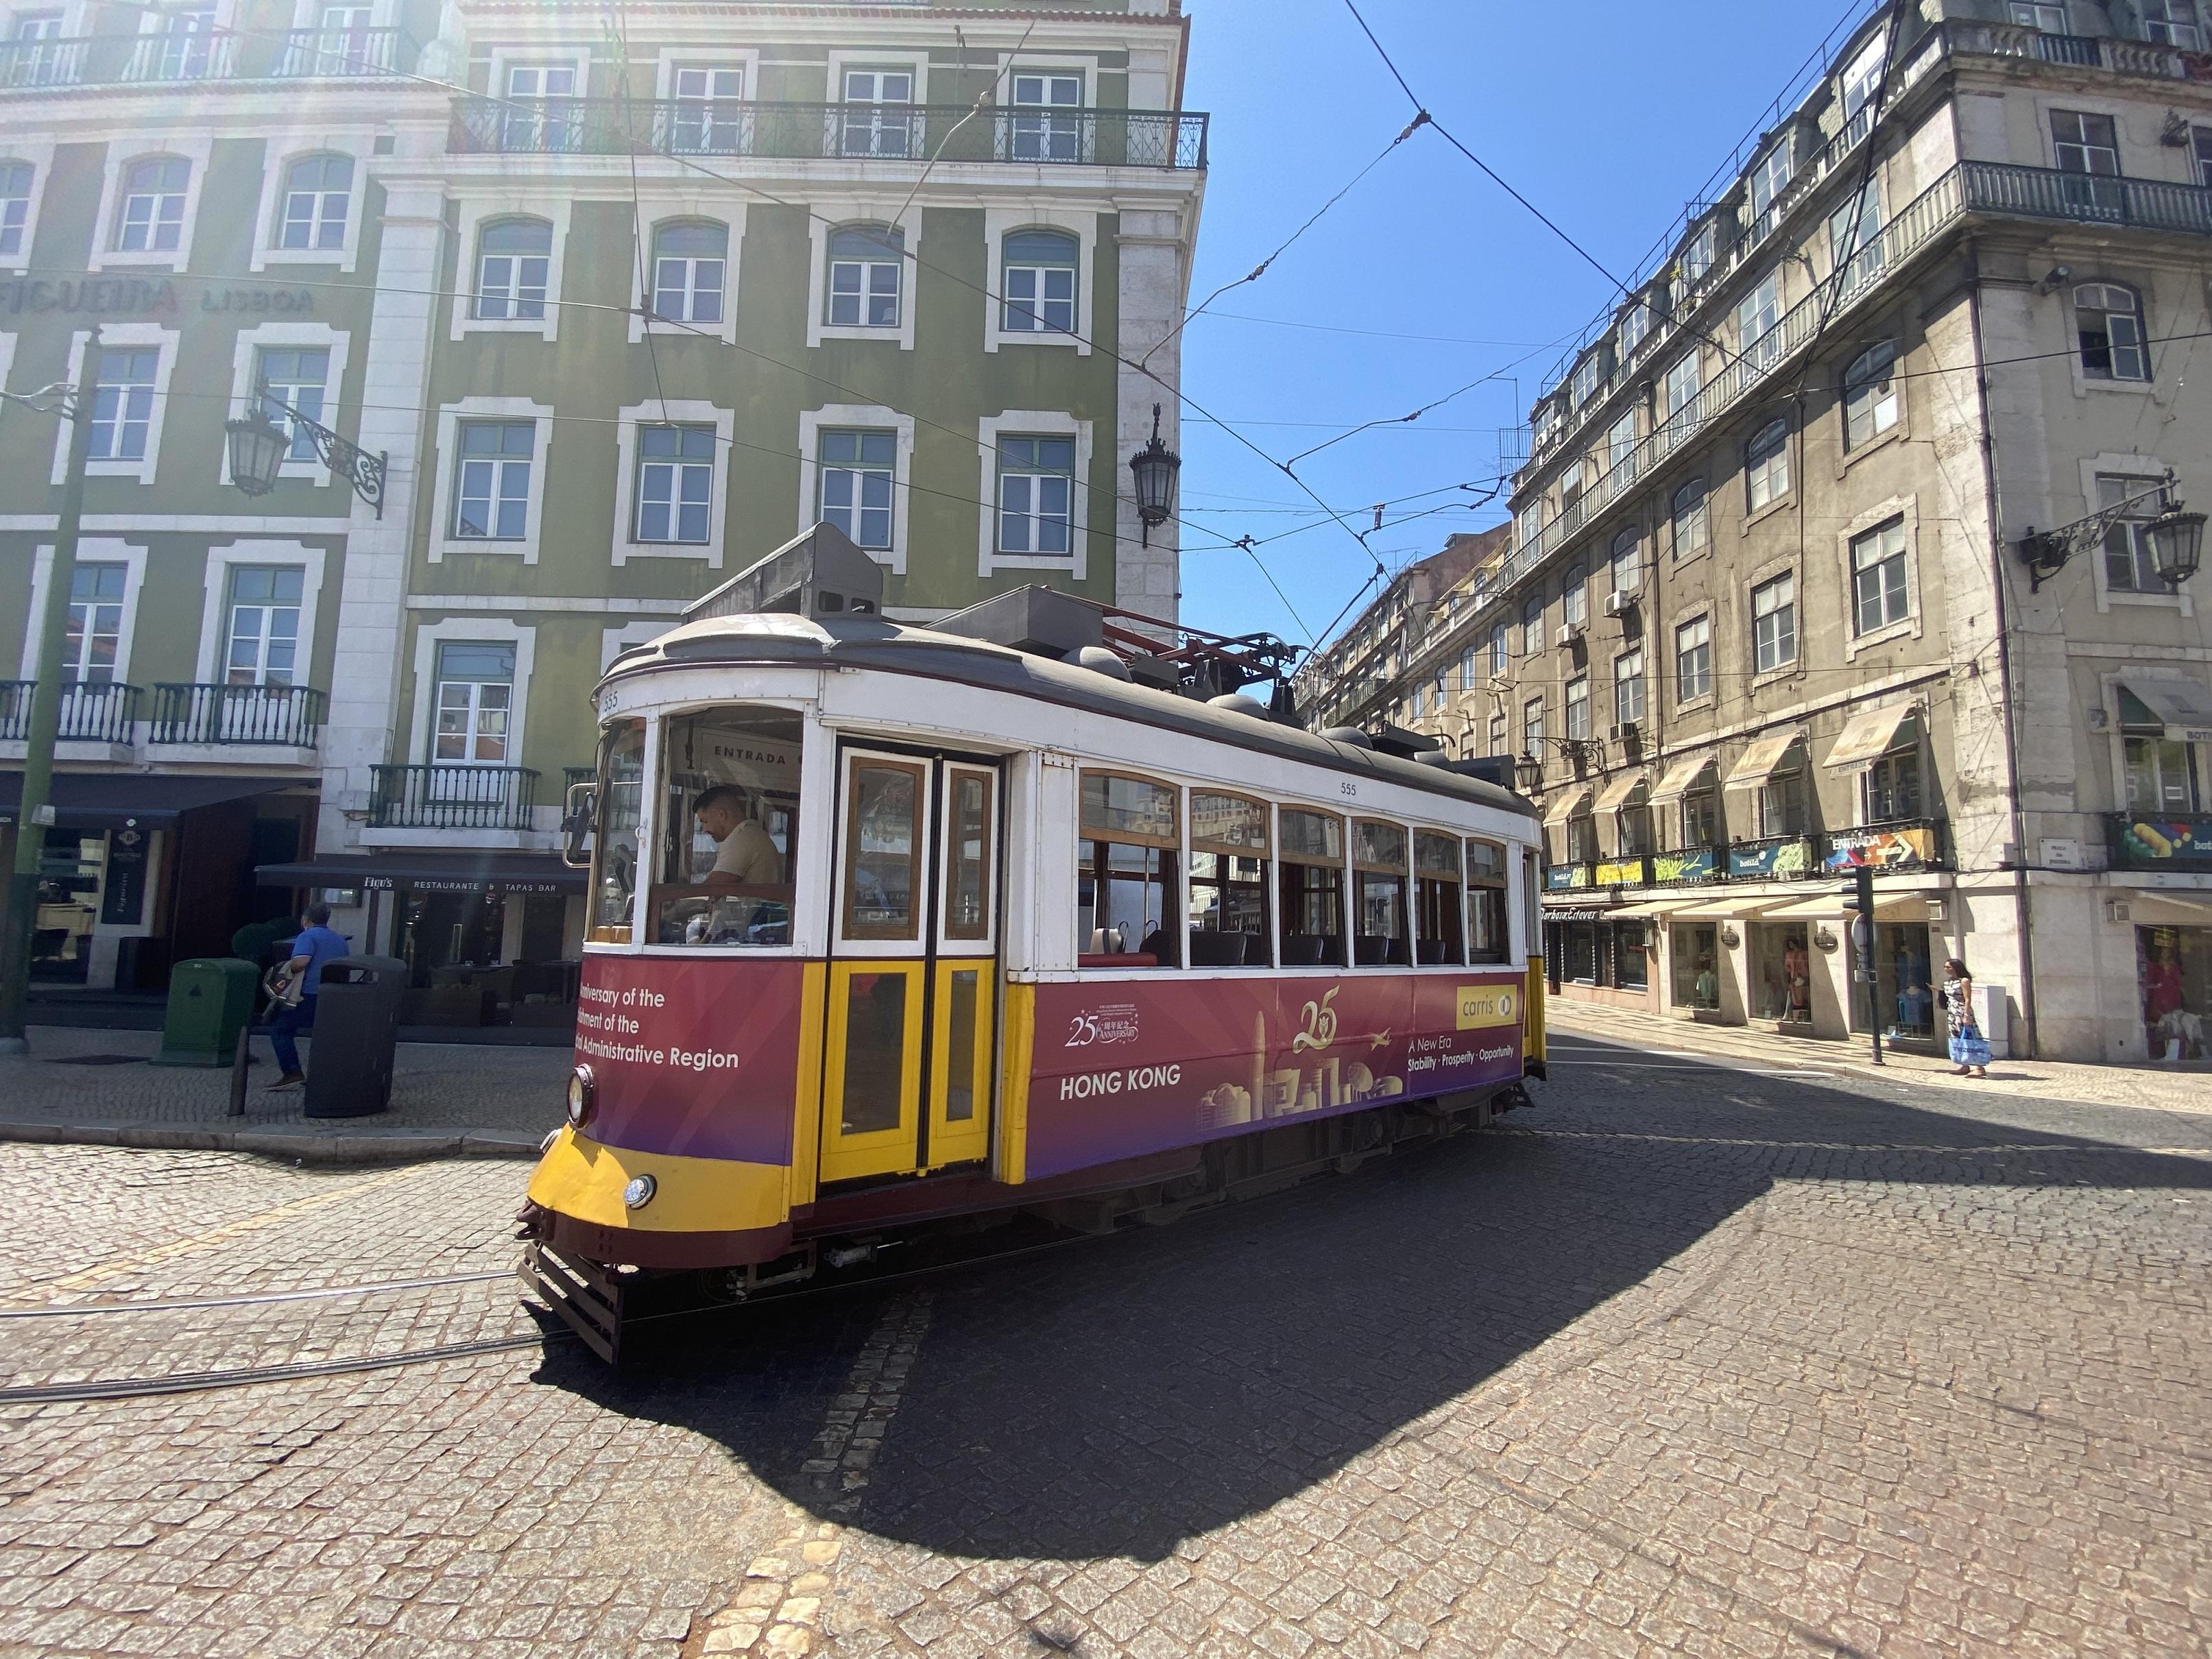 At the initiative of the Hong Kong Economic and Trade Office in Brussels, one of the trams decorated in the festive colours of the 25th anniversary of the establishment of the Hong Kong Special Administrative Region operates on the streets of Lisbon, Portugal, between June and August 2022.